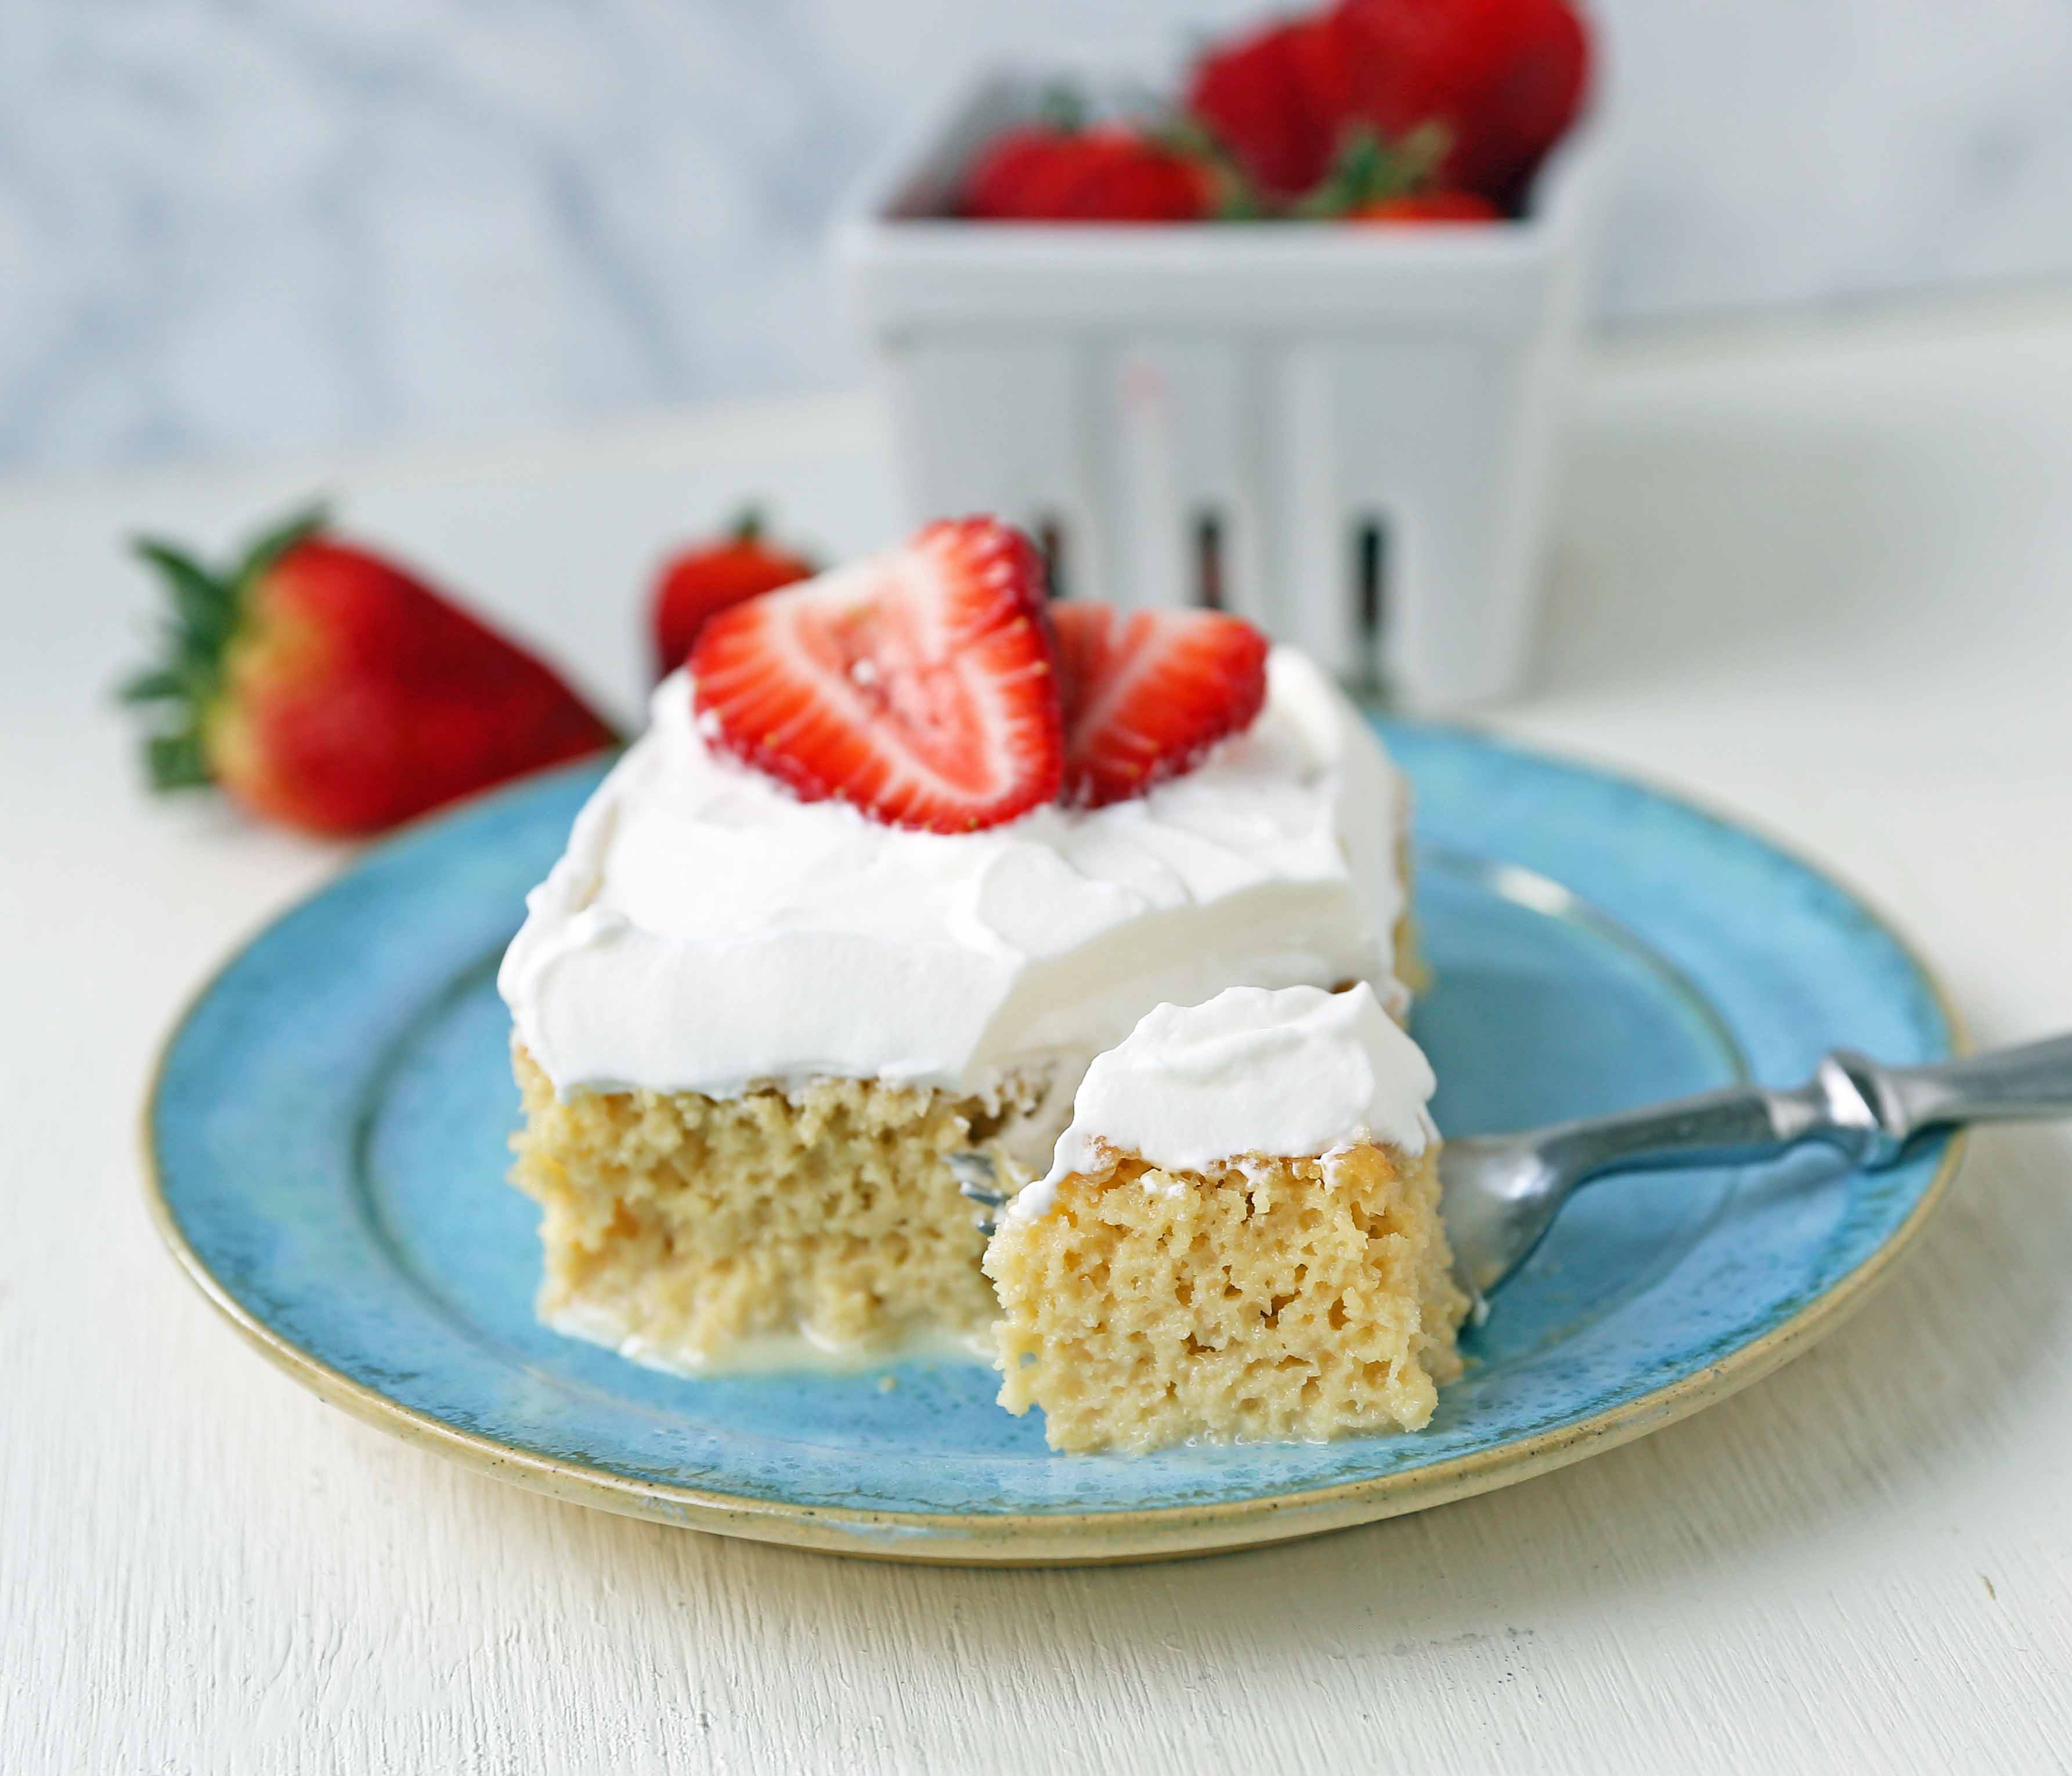 Tres Leches Cake. A classic Mexican dessert made with a vanilla sponge cake soaked with three kinds of milk -- heavy cream, evaporated milk and sweetened condensed milk and topped with whipped cream.  www.modernhoney.com #treslechescake #threemilkcake #cincodemayo 